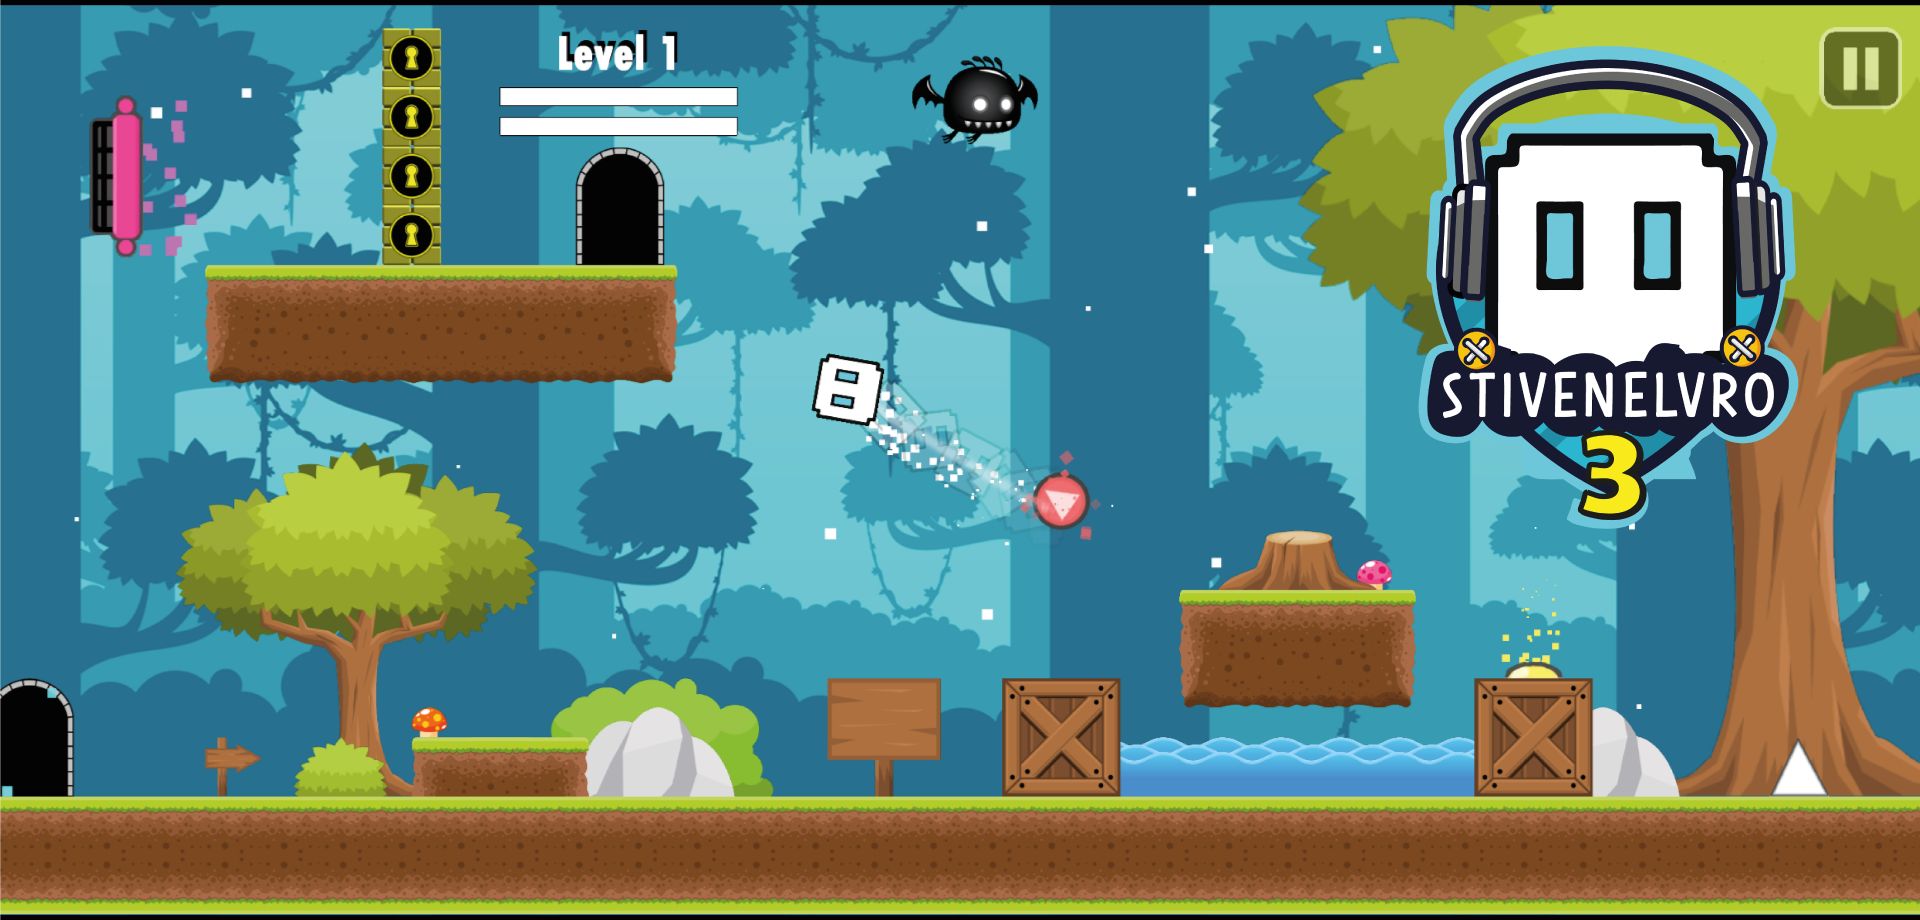 Download STIVENELVRO 3 Android free game.